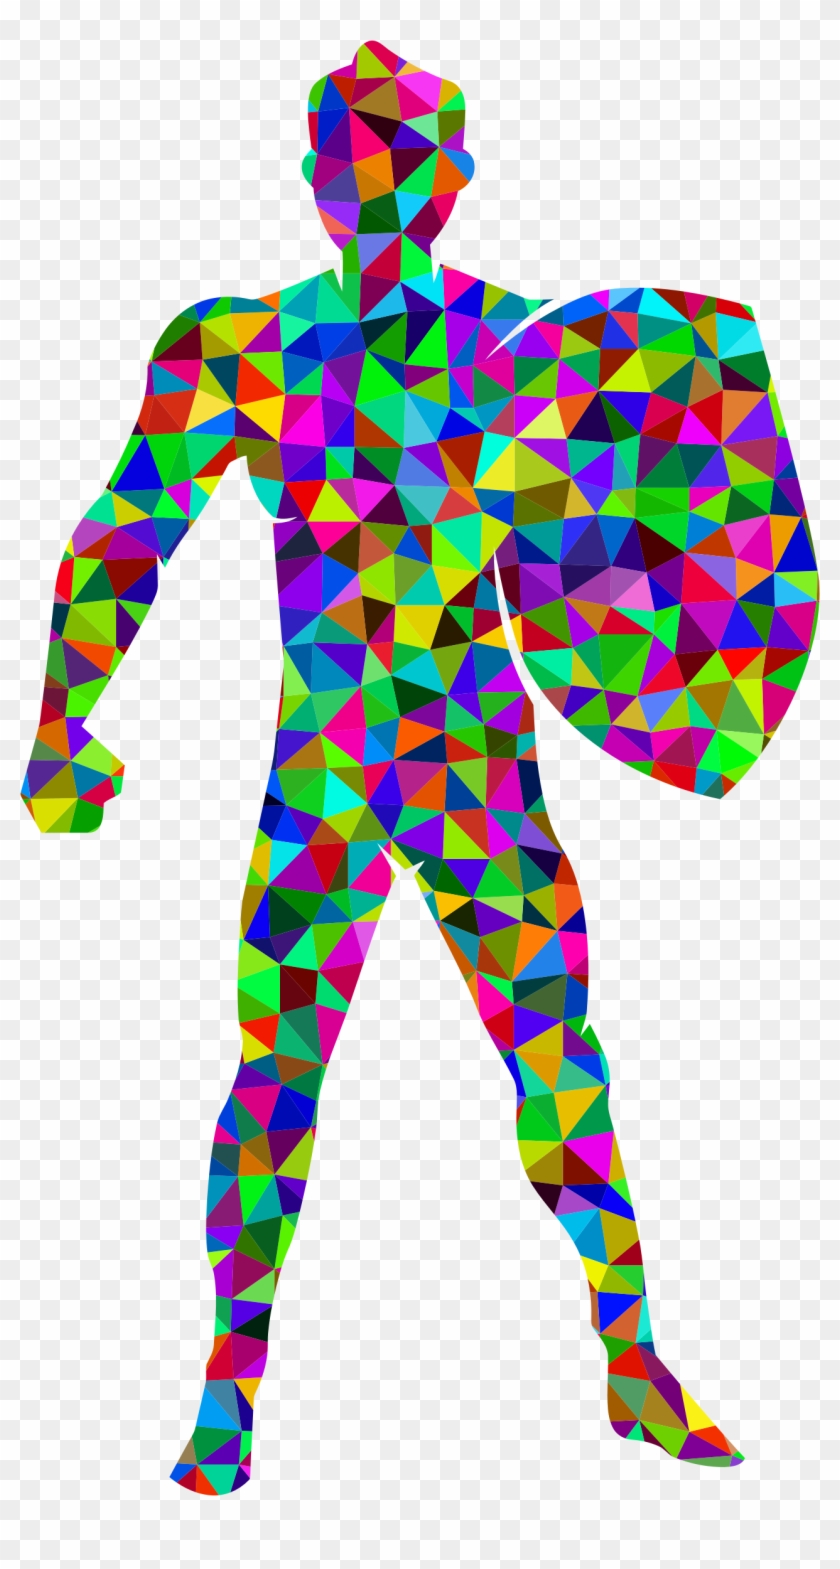 This Free Icons Png Design Of Prismatic Low Poly Man - Body Silhouette Human Body Icon Png Clipart